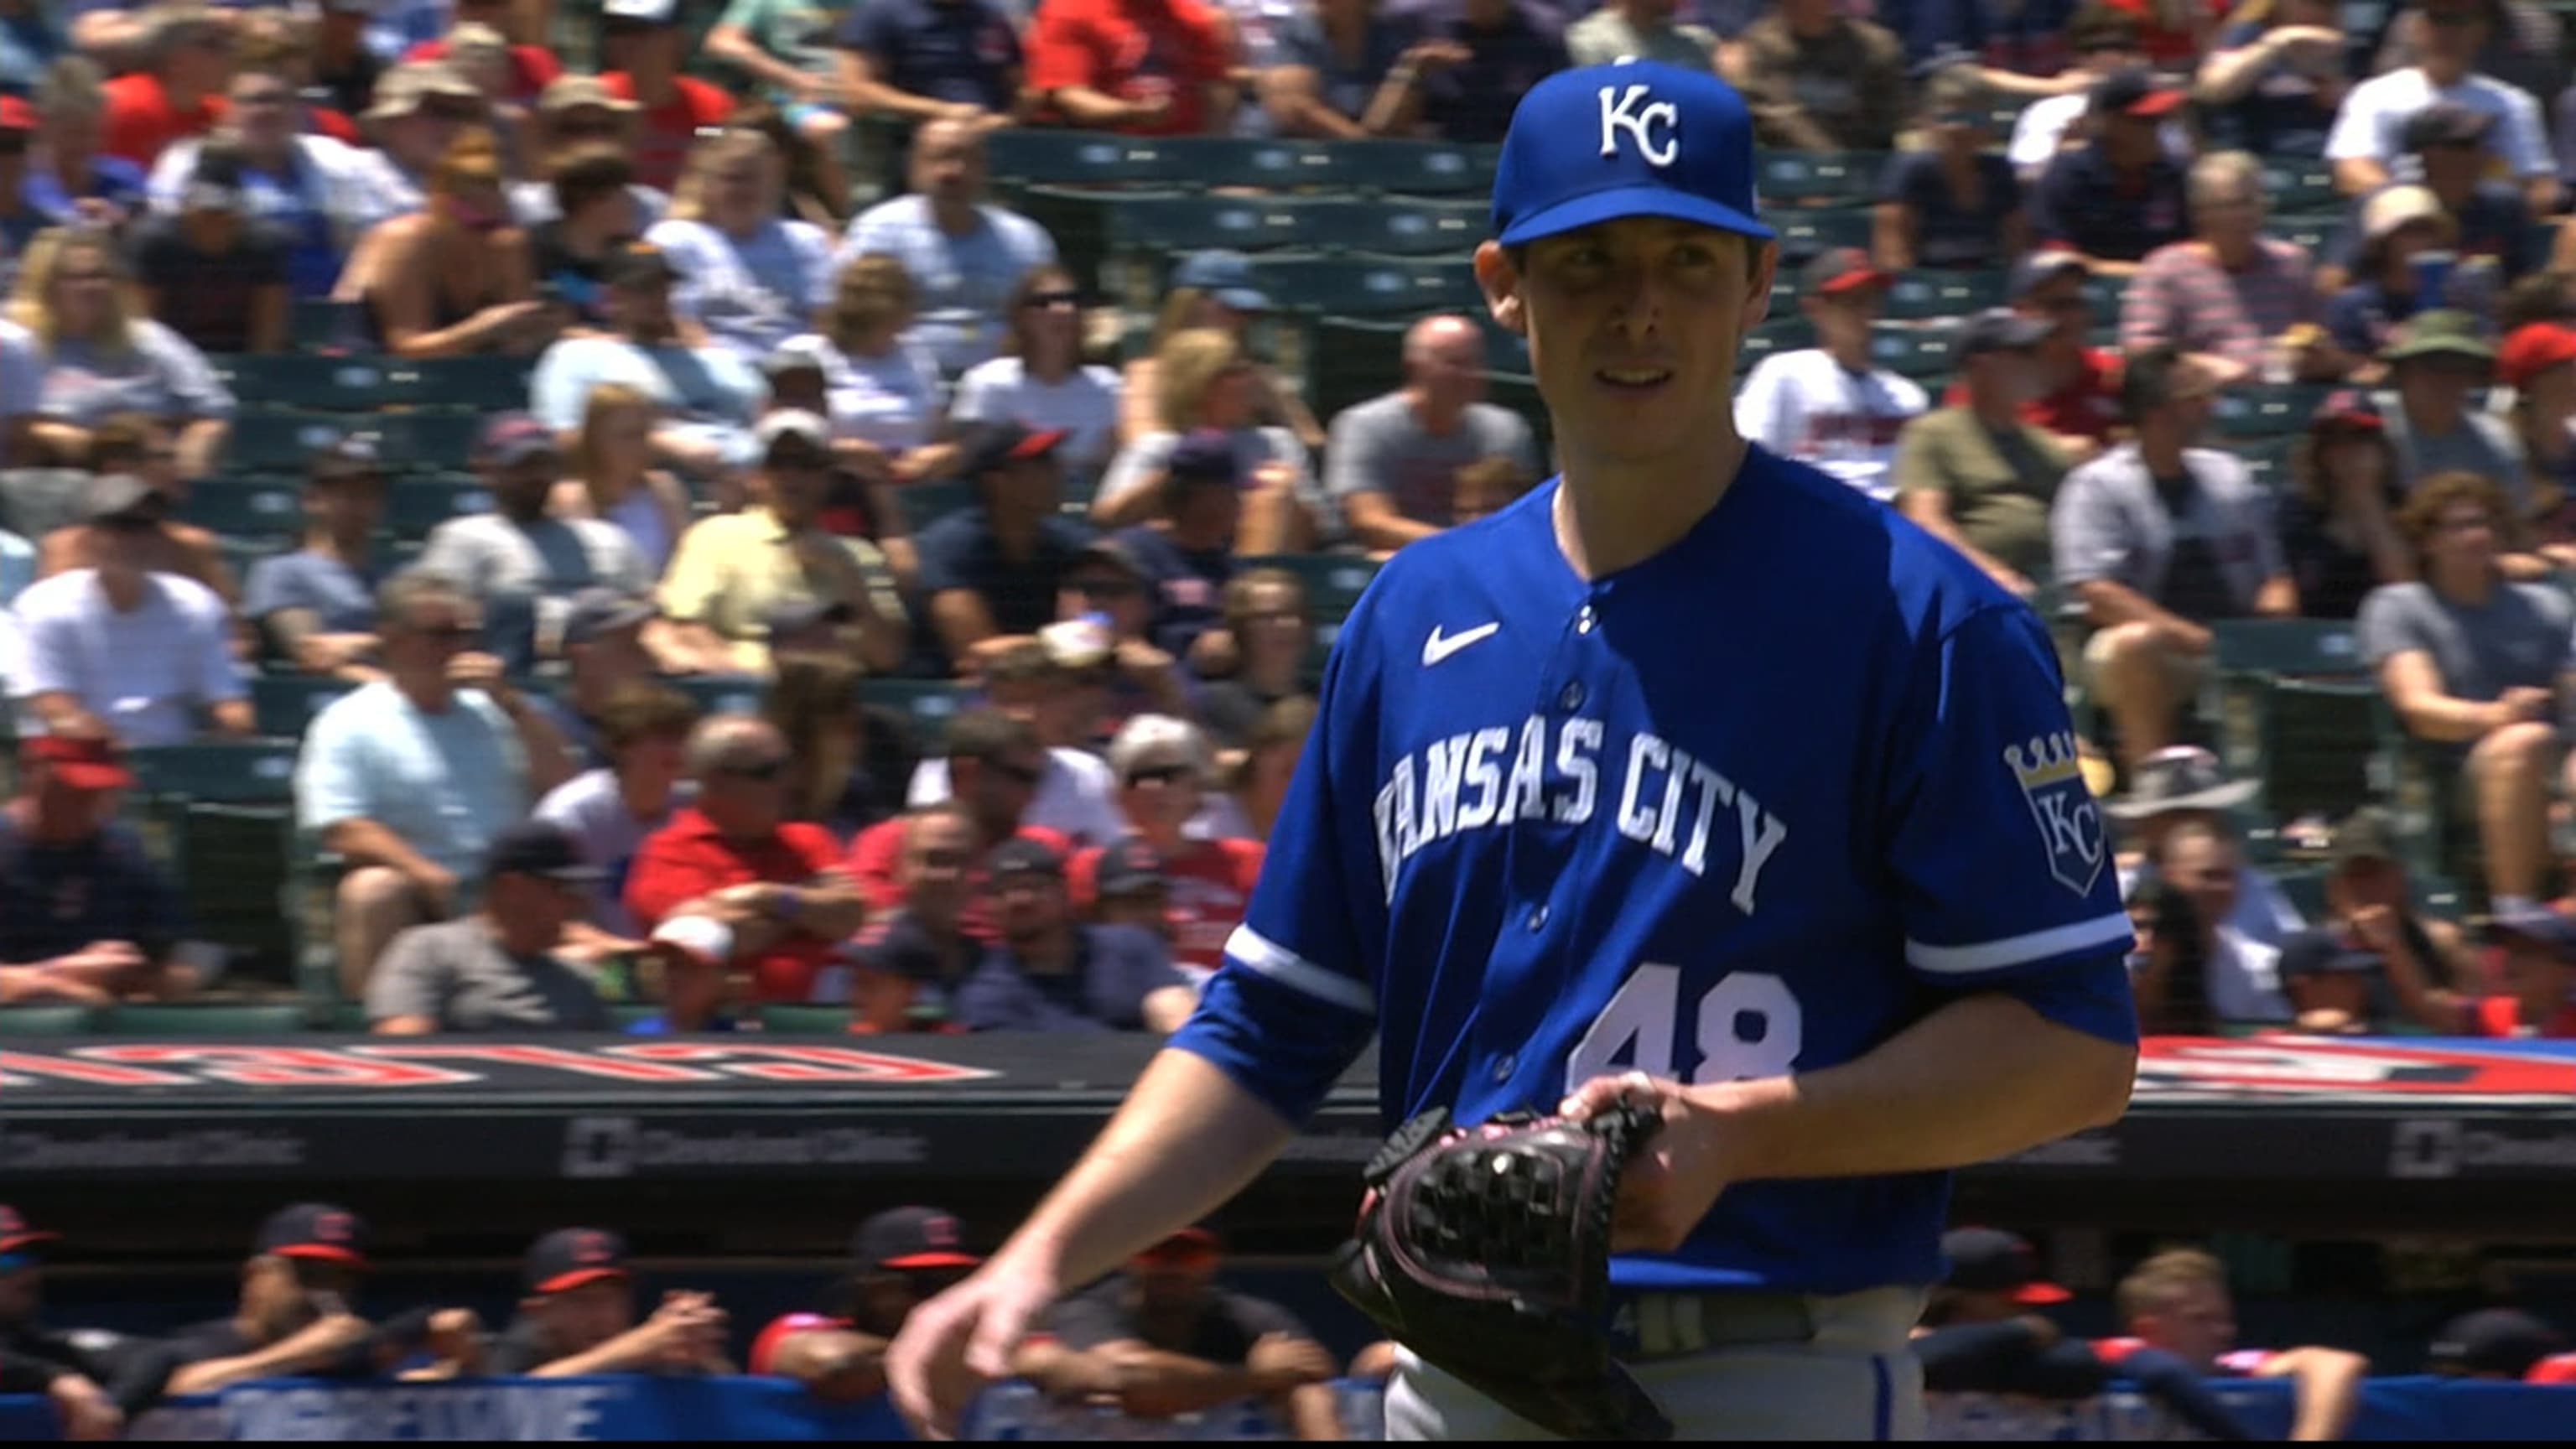 Yarbrough returns, pitches Royals past Guardians, 4-1 to snap 6